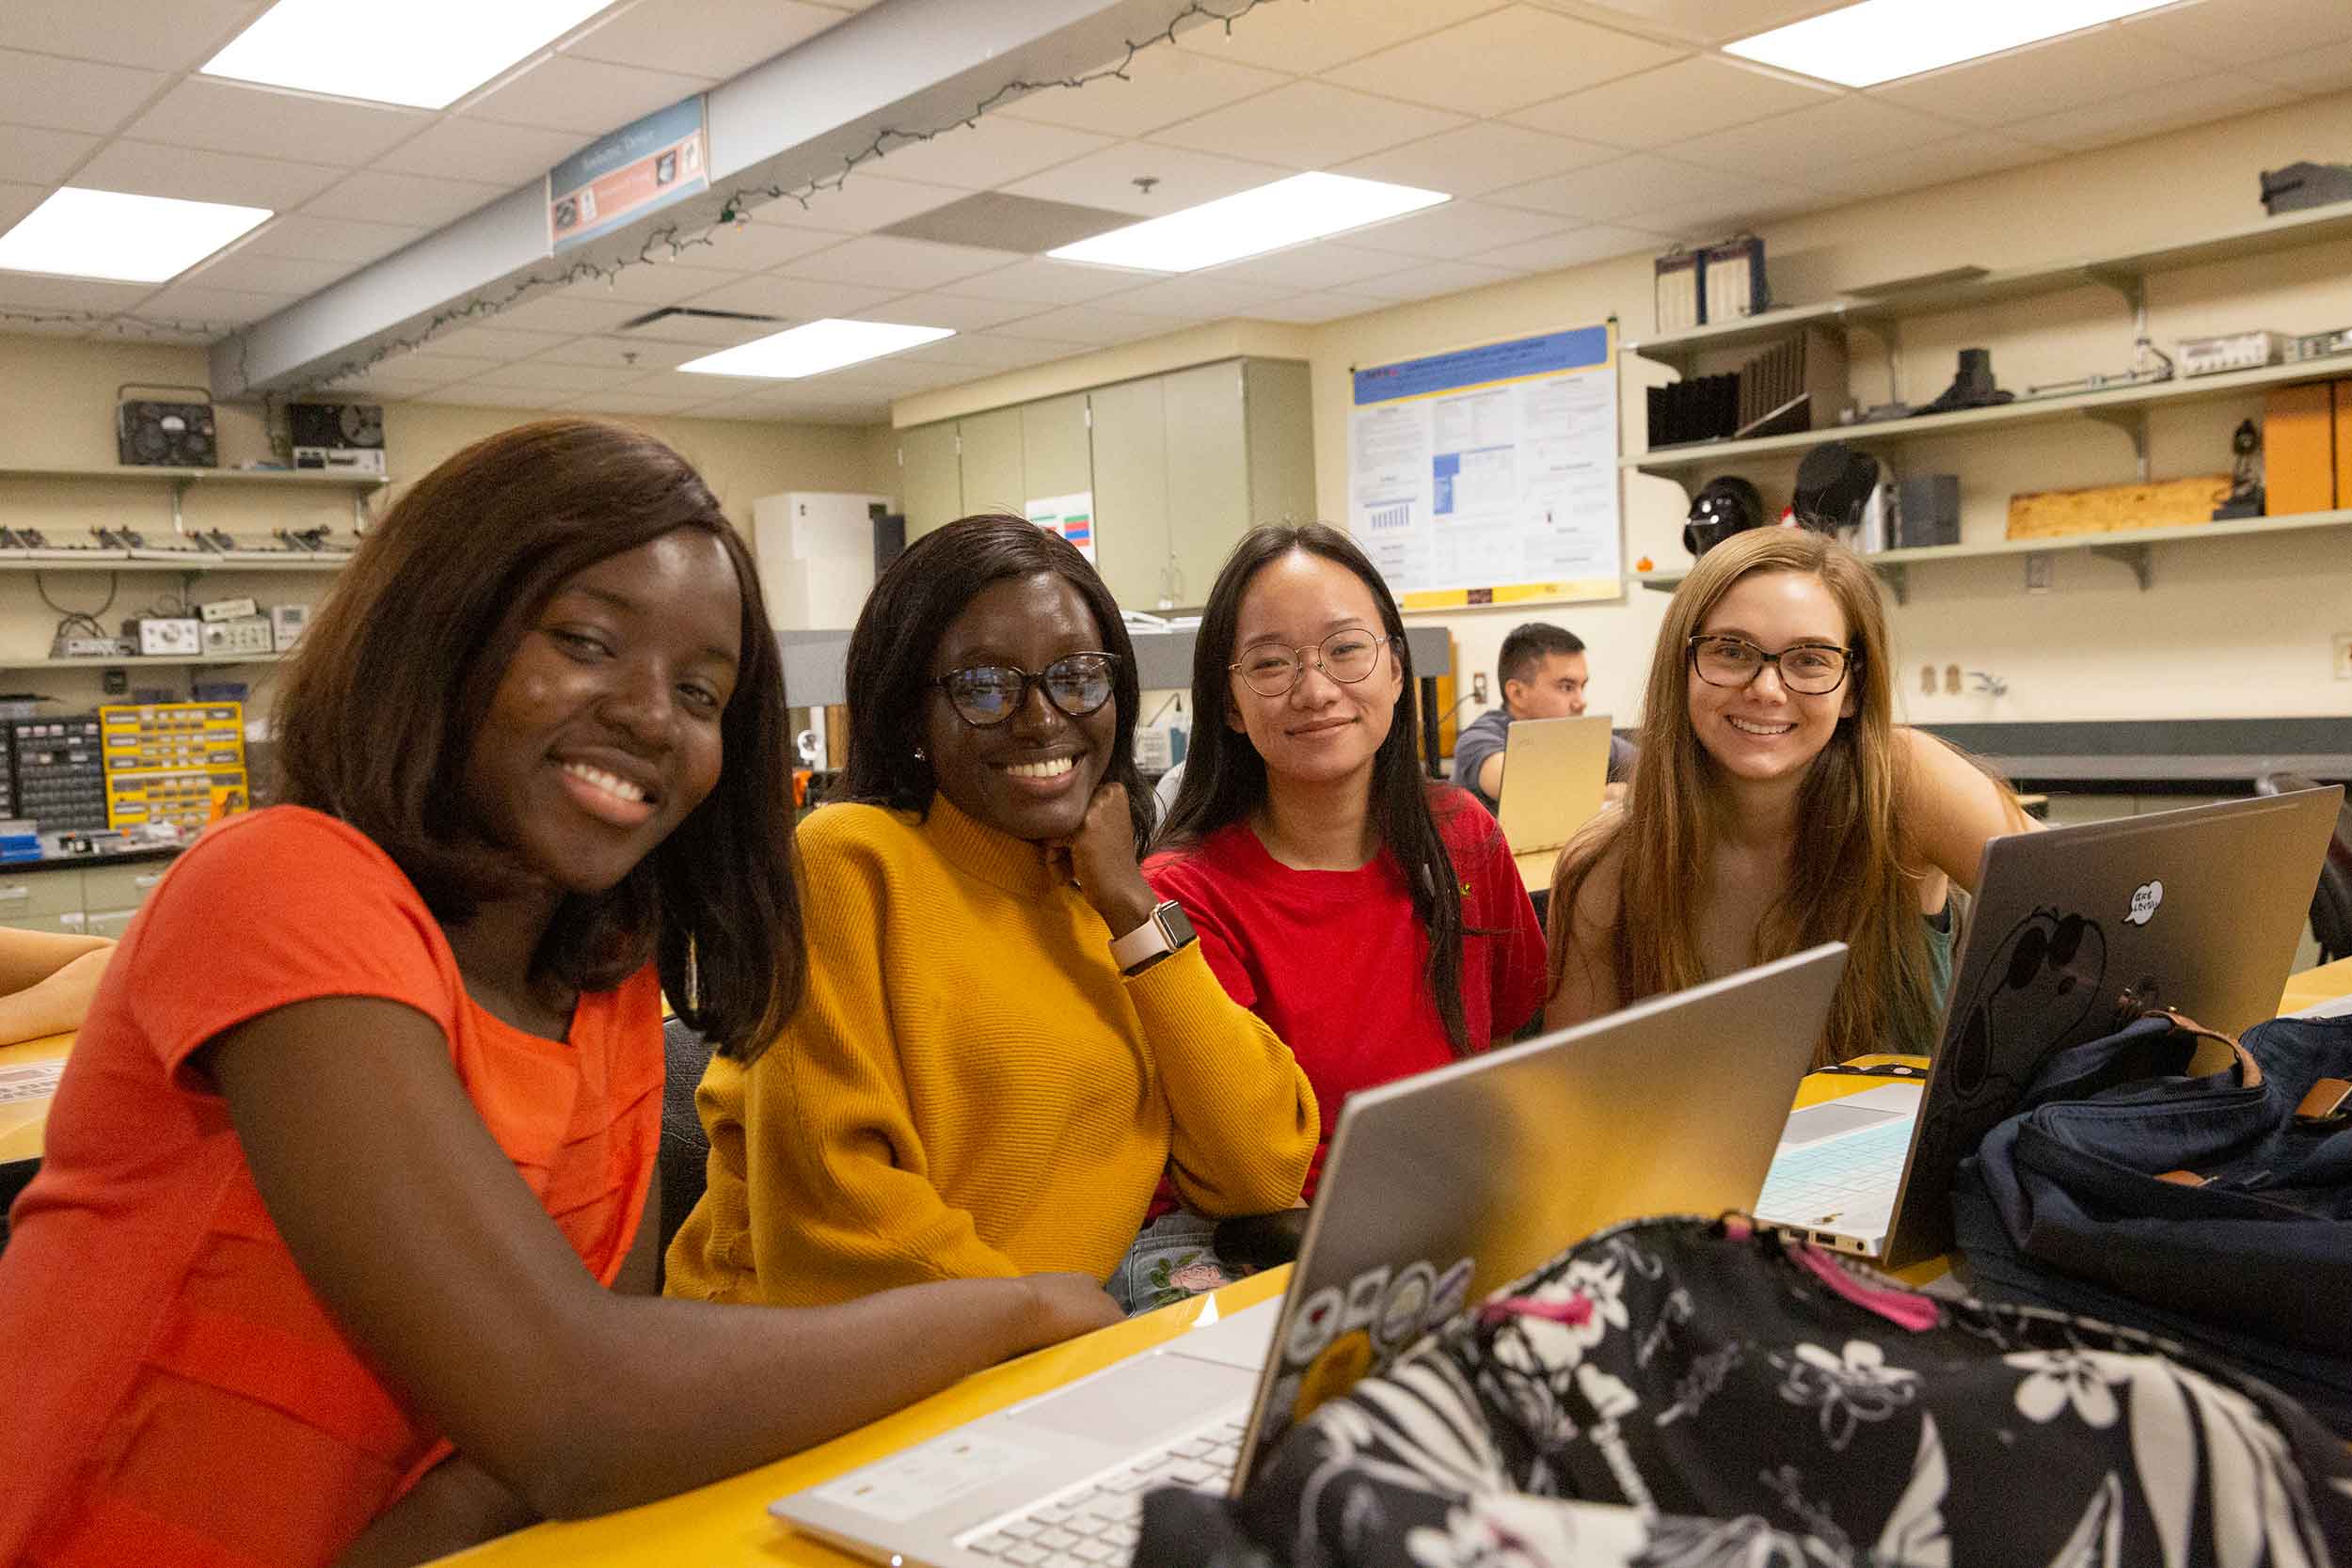 Four undergraduate women take a break from their research to smile for the camera while sitting at a long lab table with their laptops.